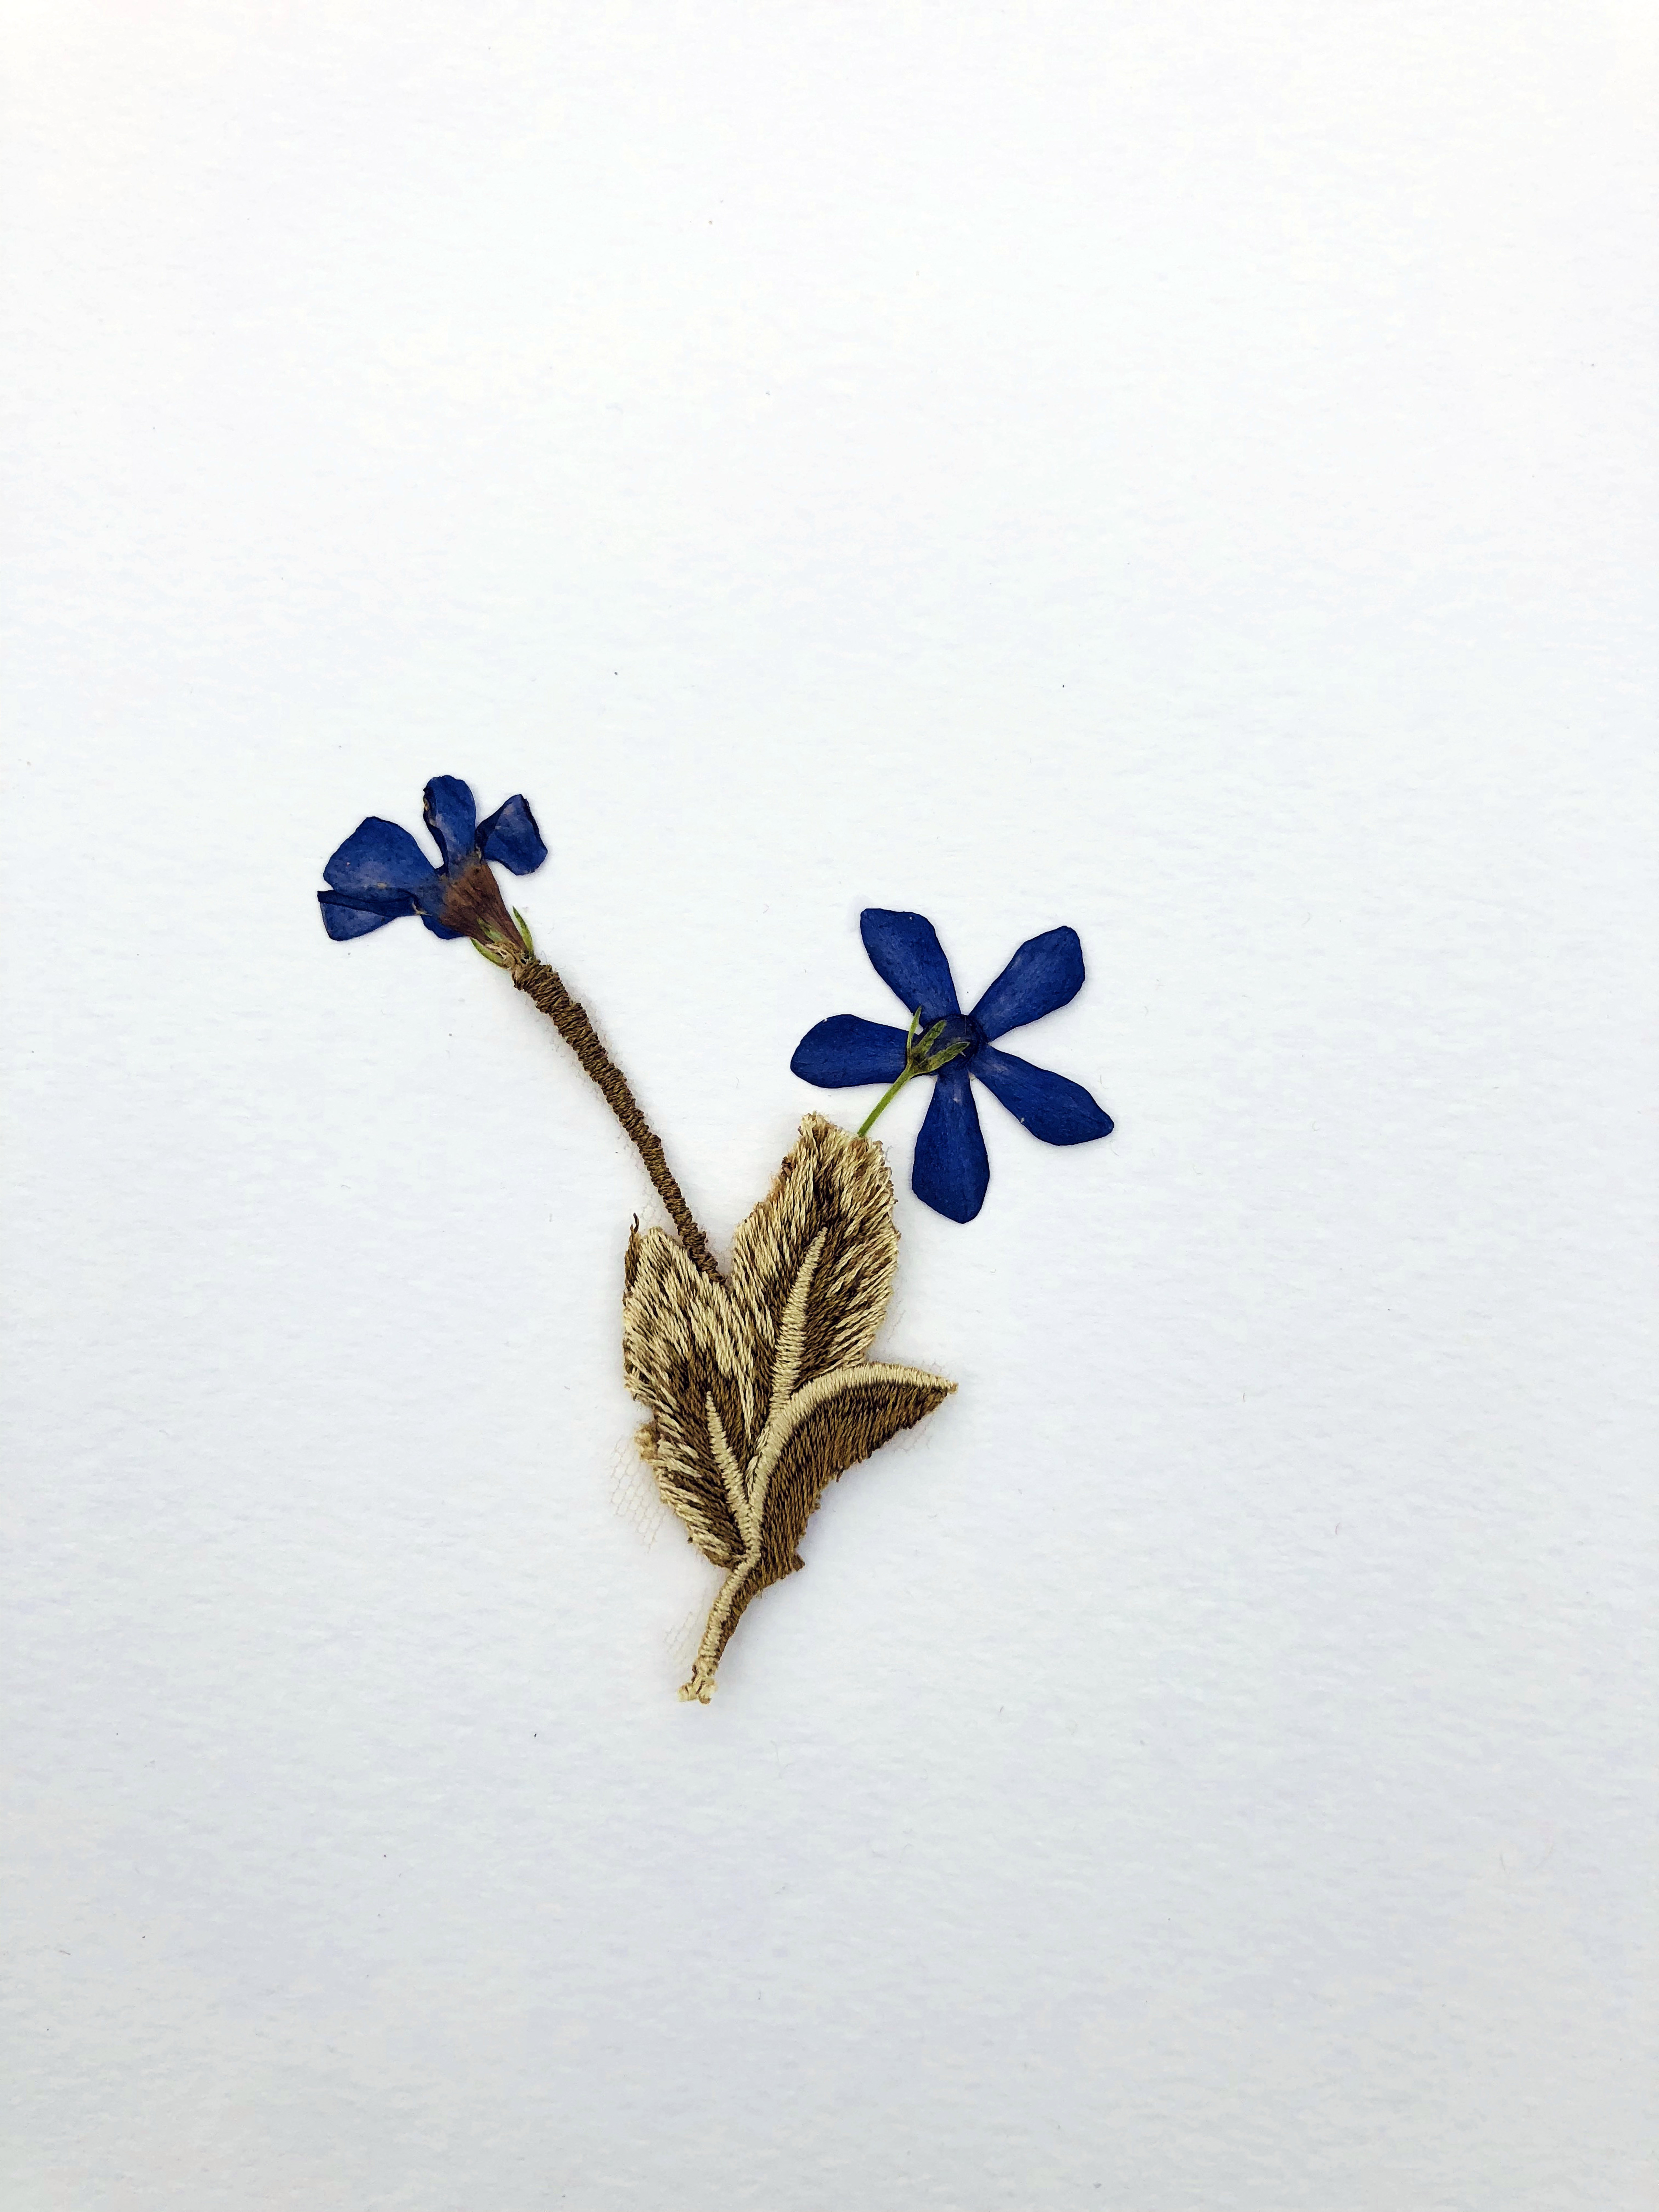 Jil Weinstock, Unwanted Collaborator (beige, brown, army green and blue flower), 2020, Plant life, thread, adhesive and rag paper, 10 x 8 1/2 inches